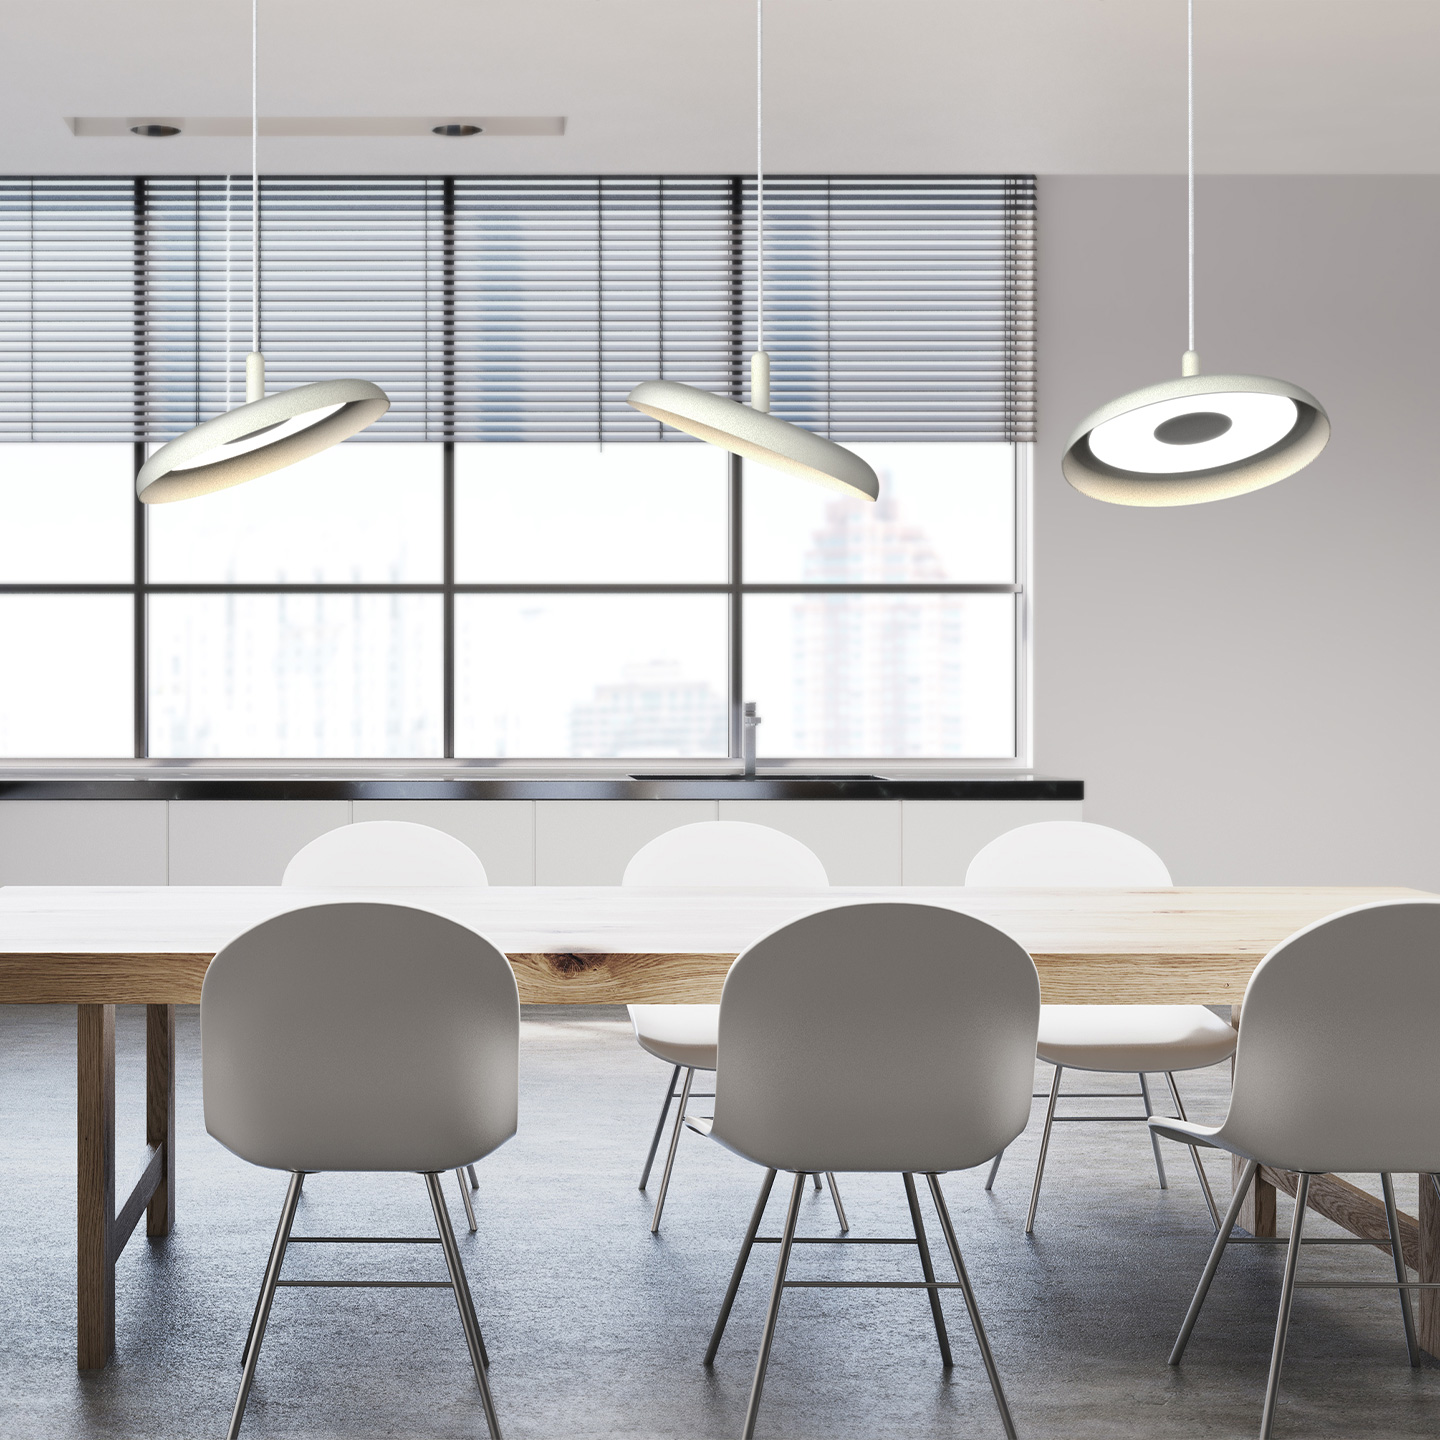 Nivél is a LED light engine providing seamless control for any space.